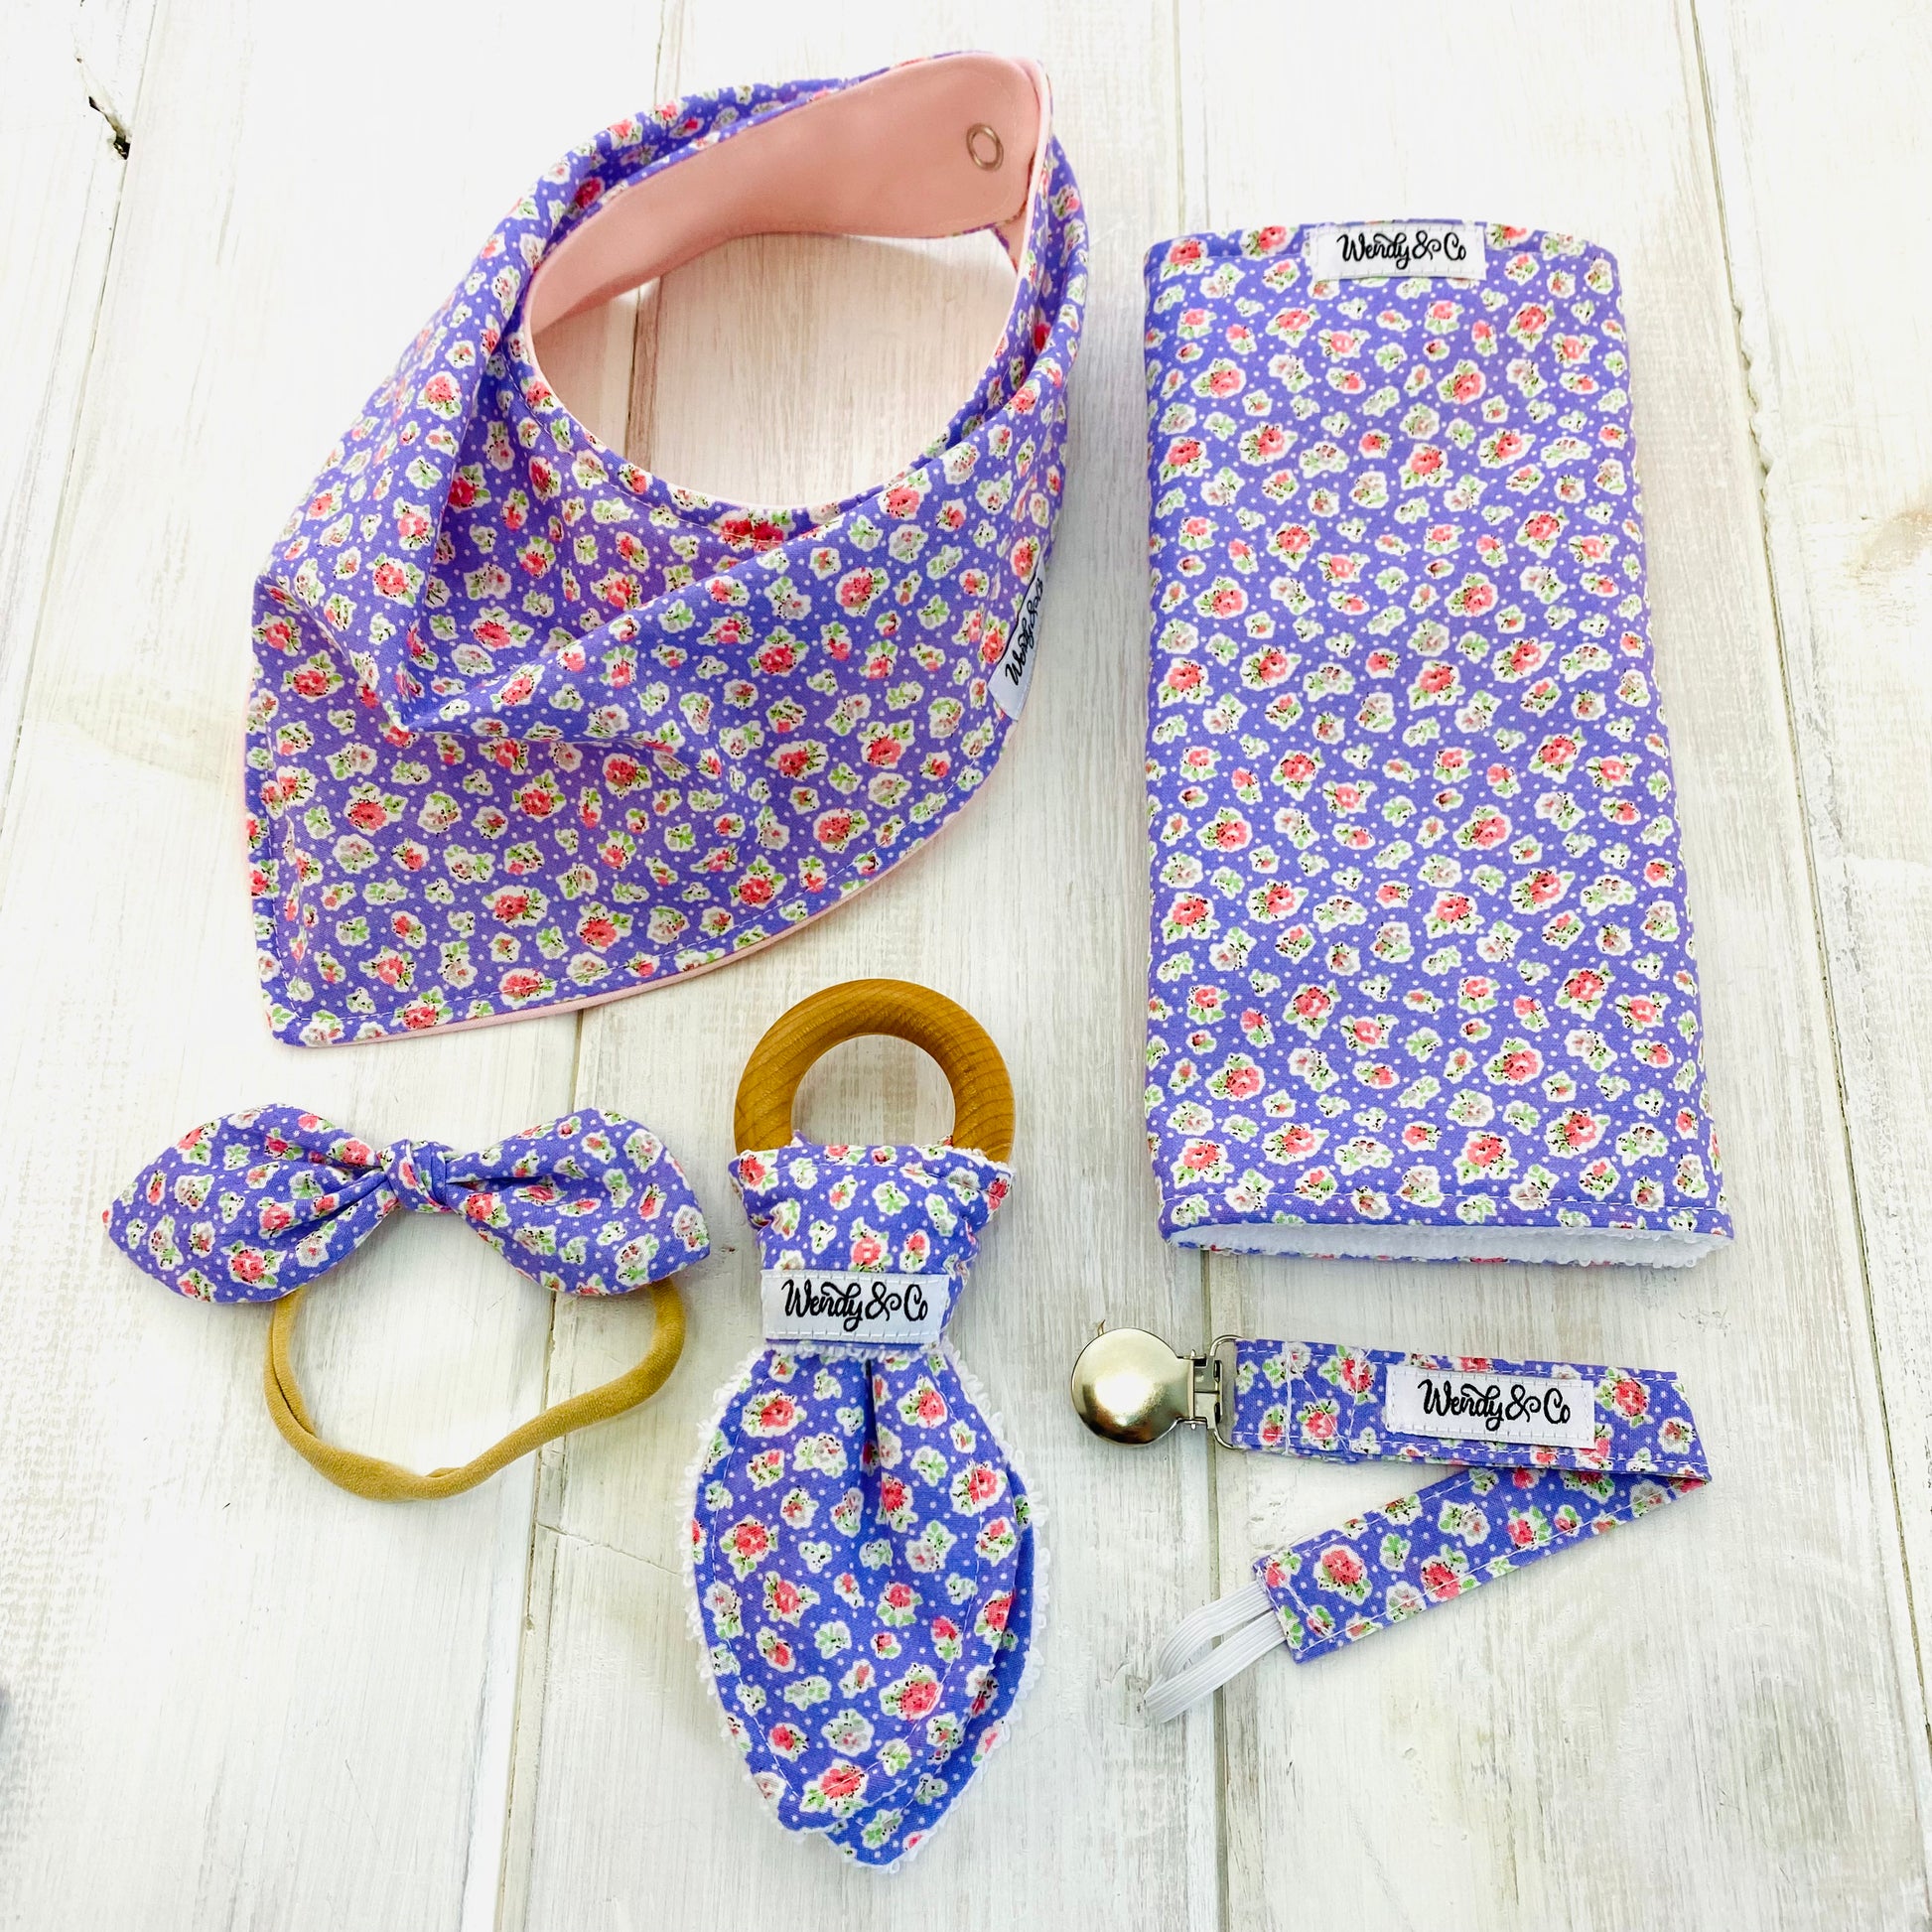 Baby gift set in lilac floral print.